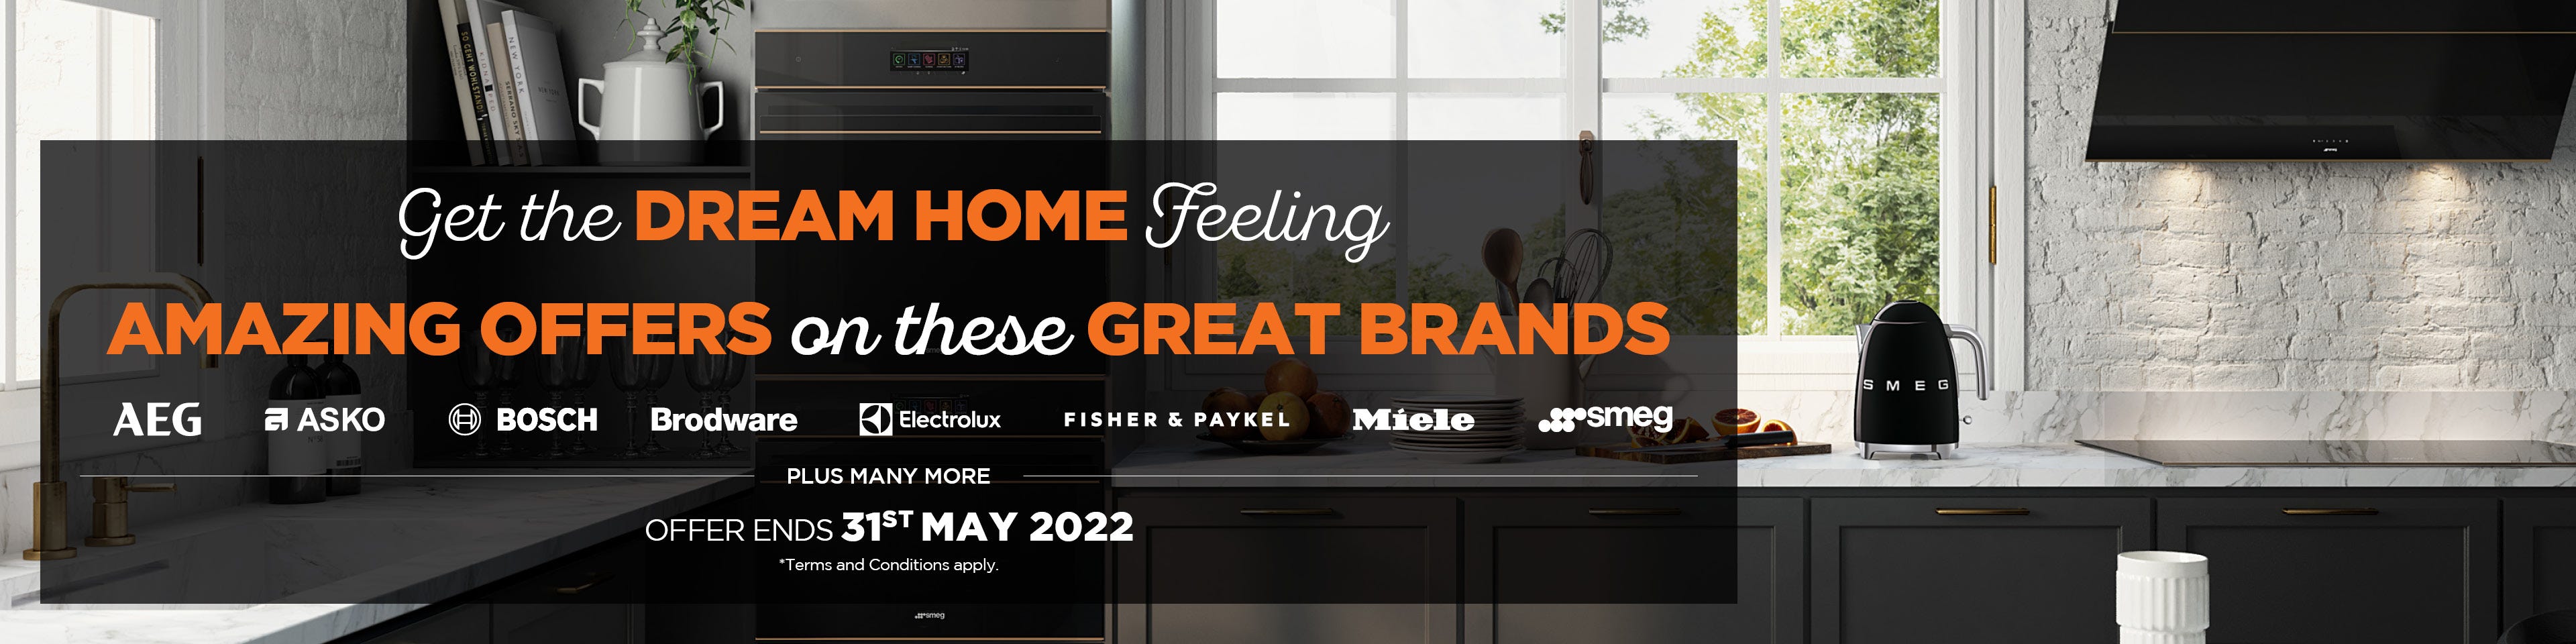 Get the DREAM HOME feeling with great offers on big brands at e&s. Offers end 31/05/22. Find out more at an e&s near you.